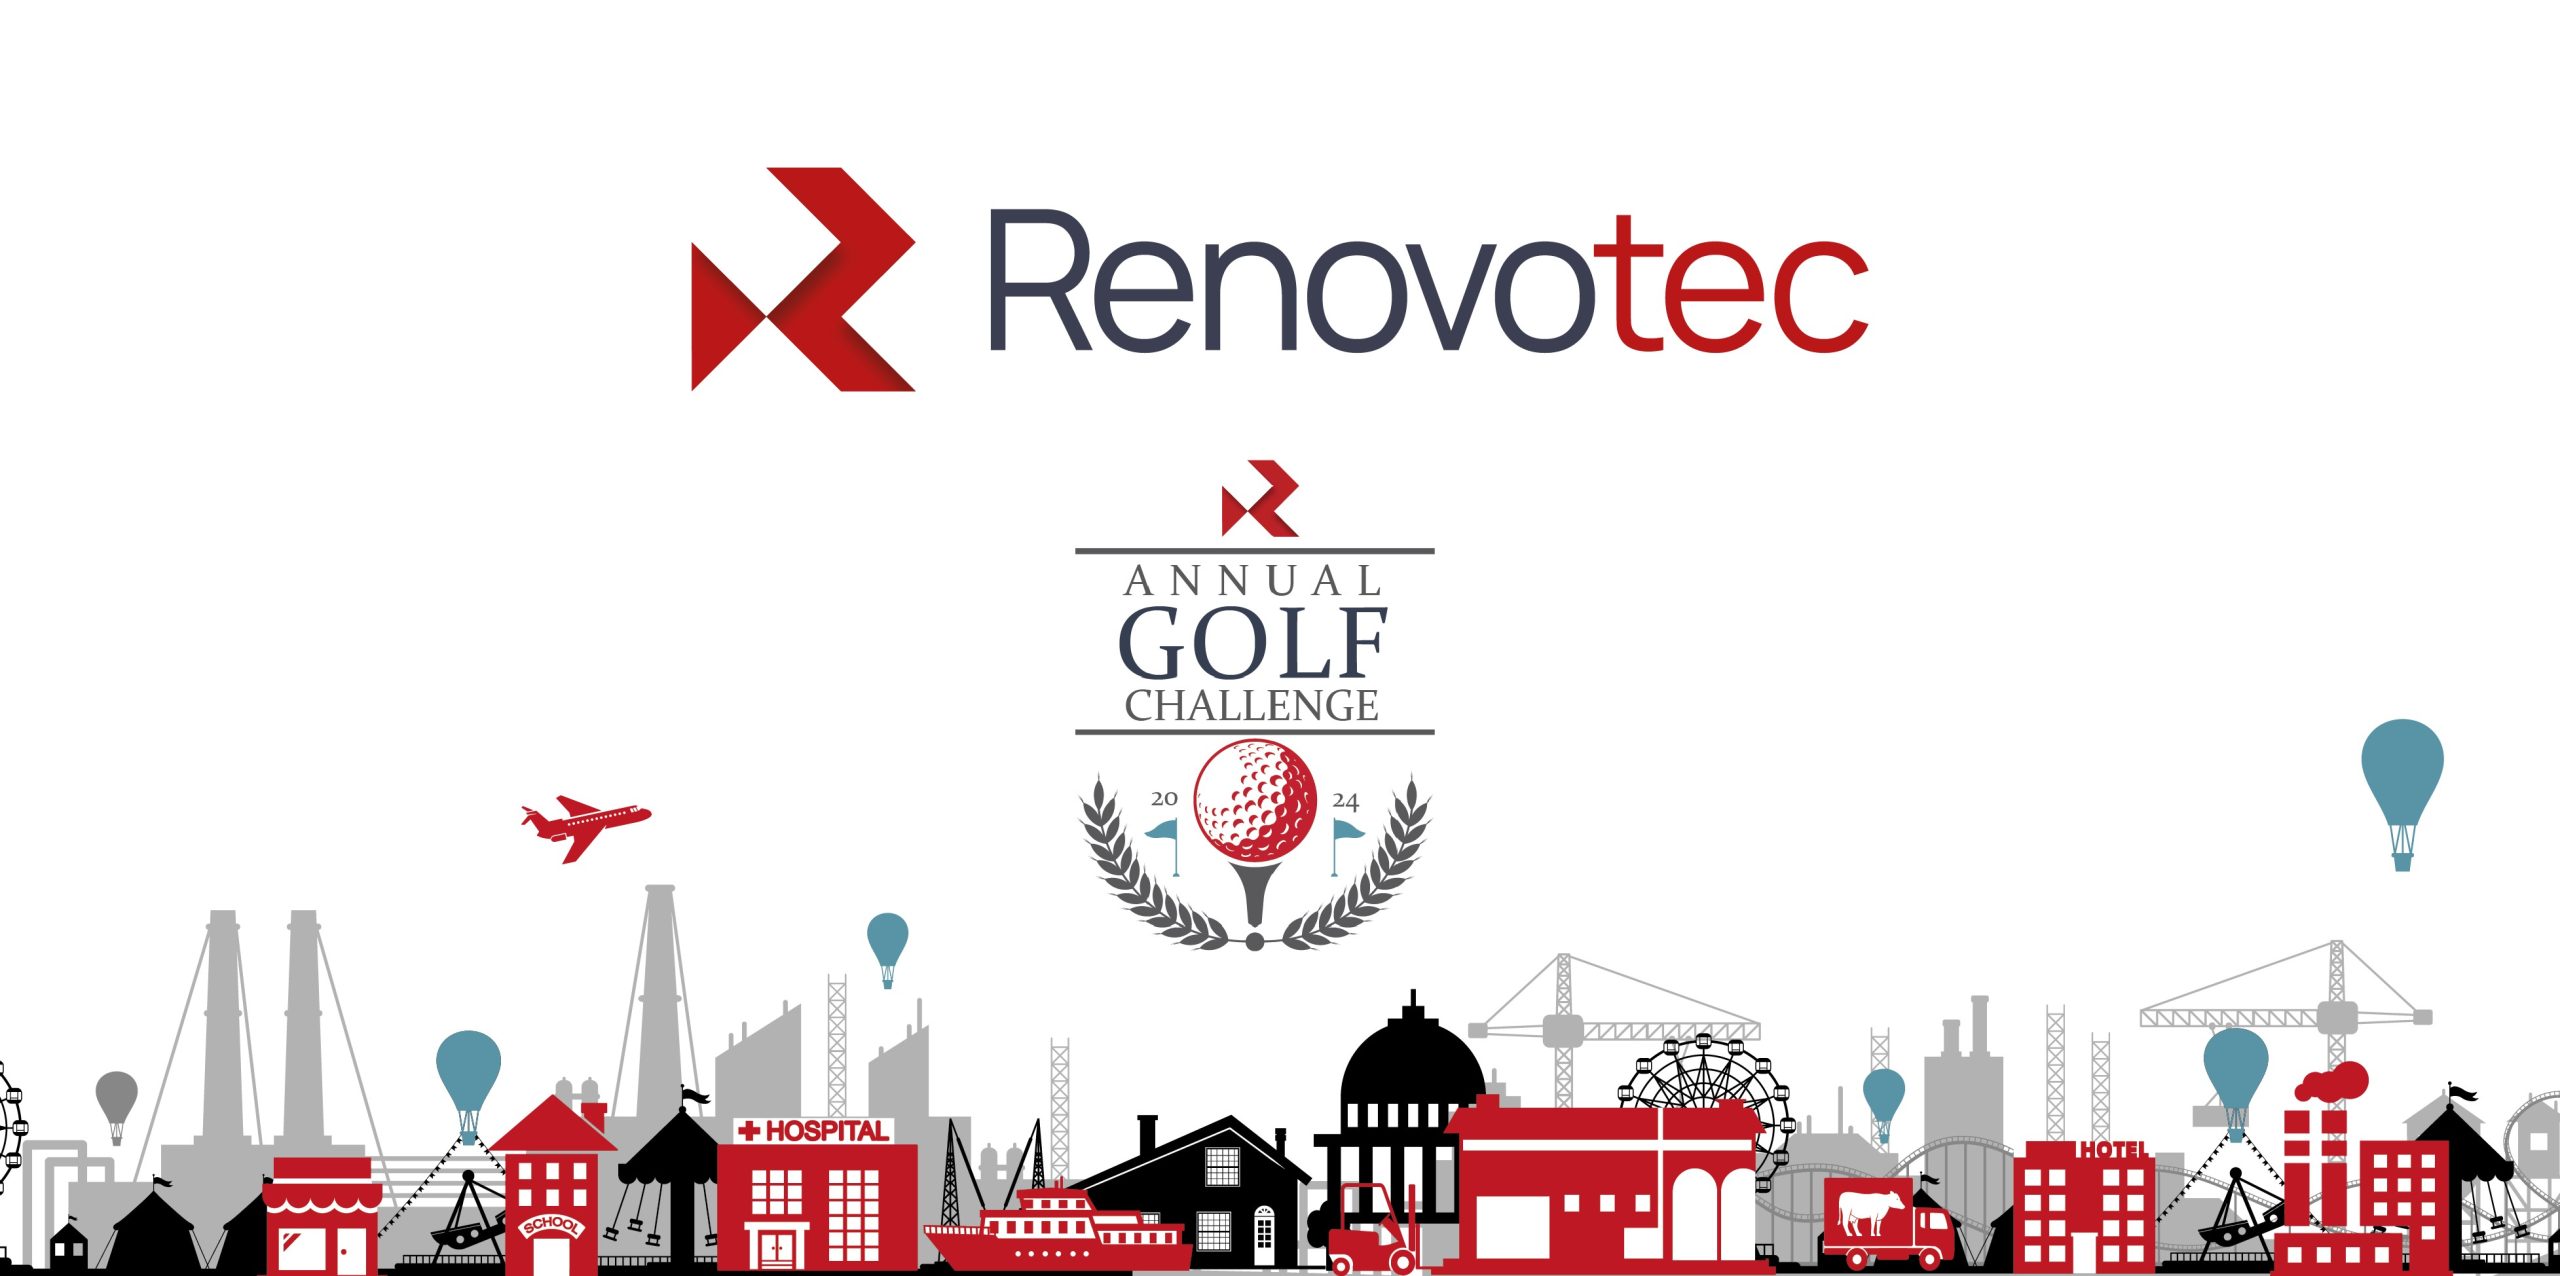 Renovotec Annual Golf Challenge and Innovation Centre Forum